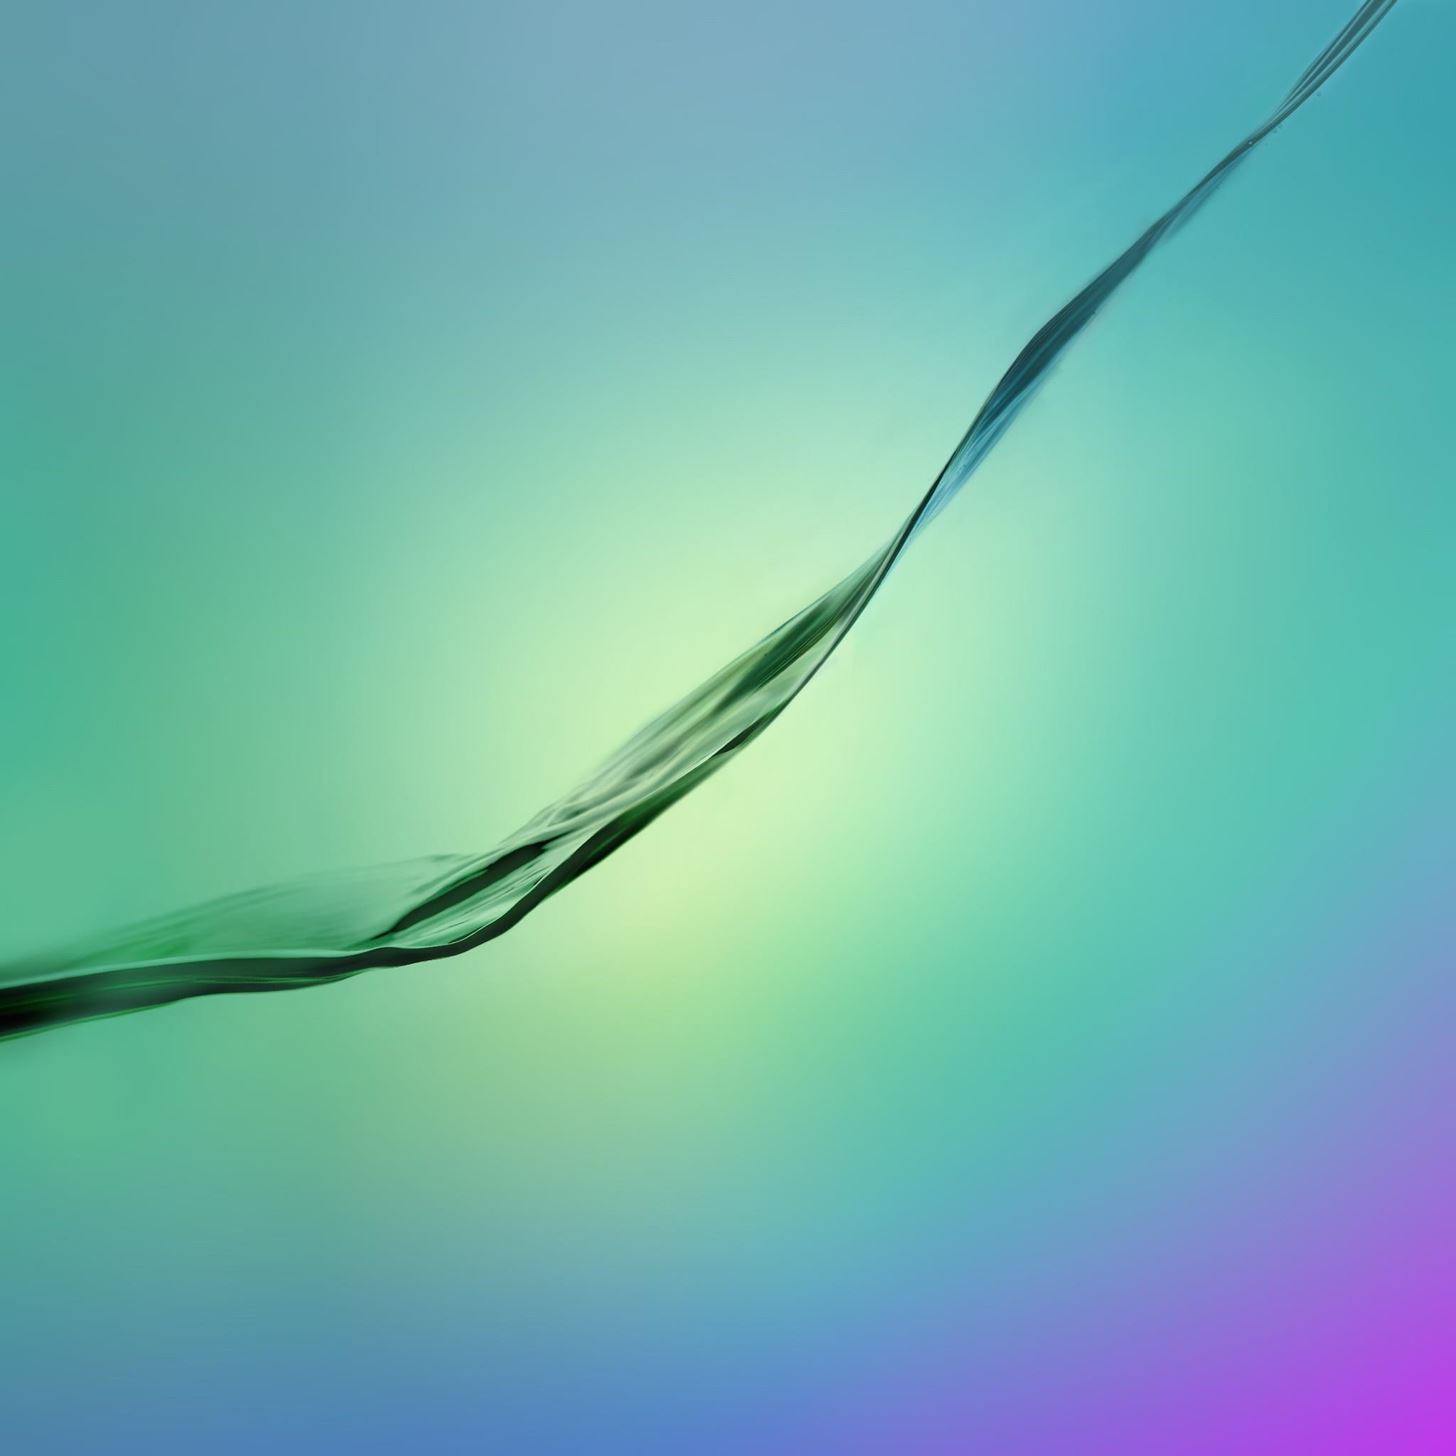 Why Wait? Get the Samsung Galaxy S6's Wallpapers Today